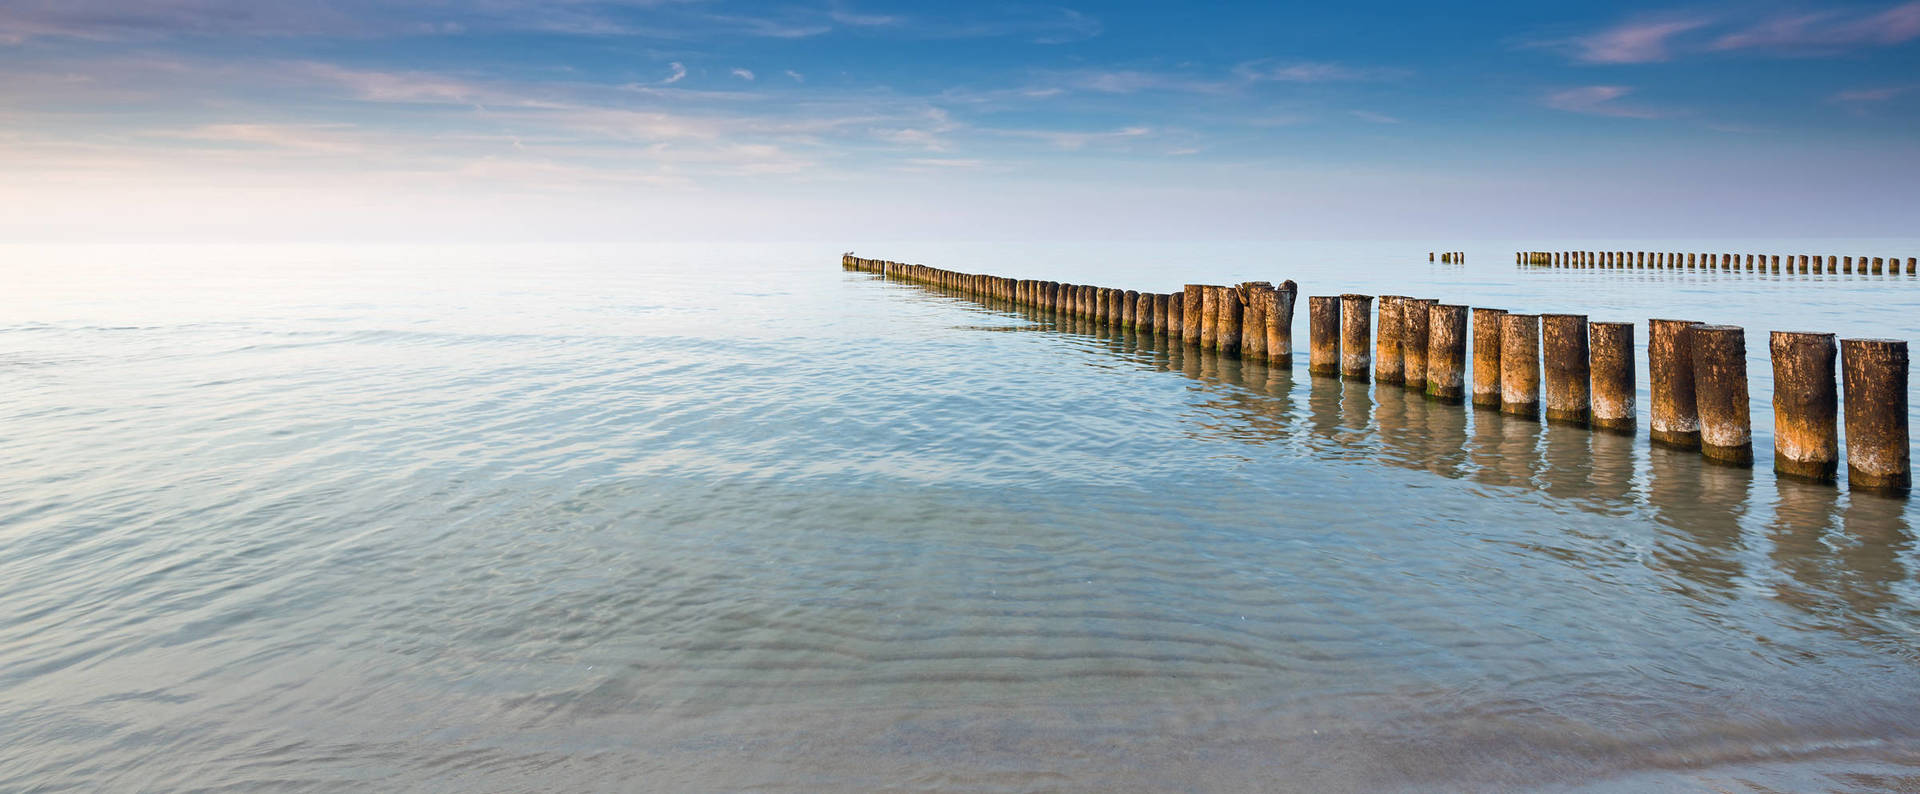 Welcome to Germany´s sunniest island - H+ Hotel Ferienpark Usedom